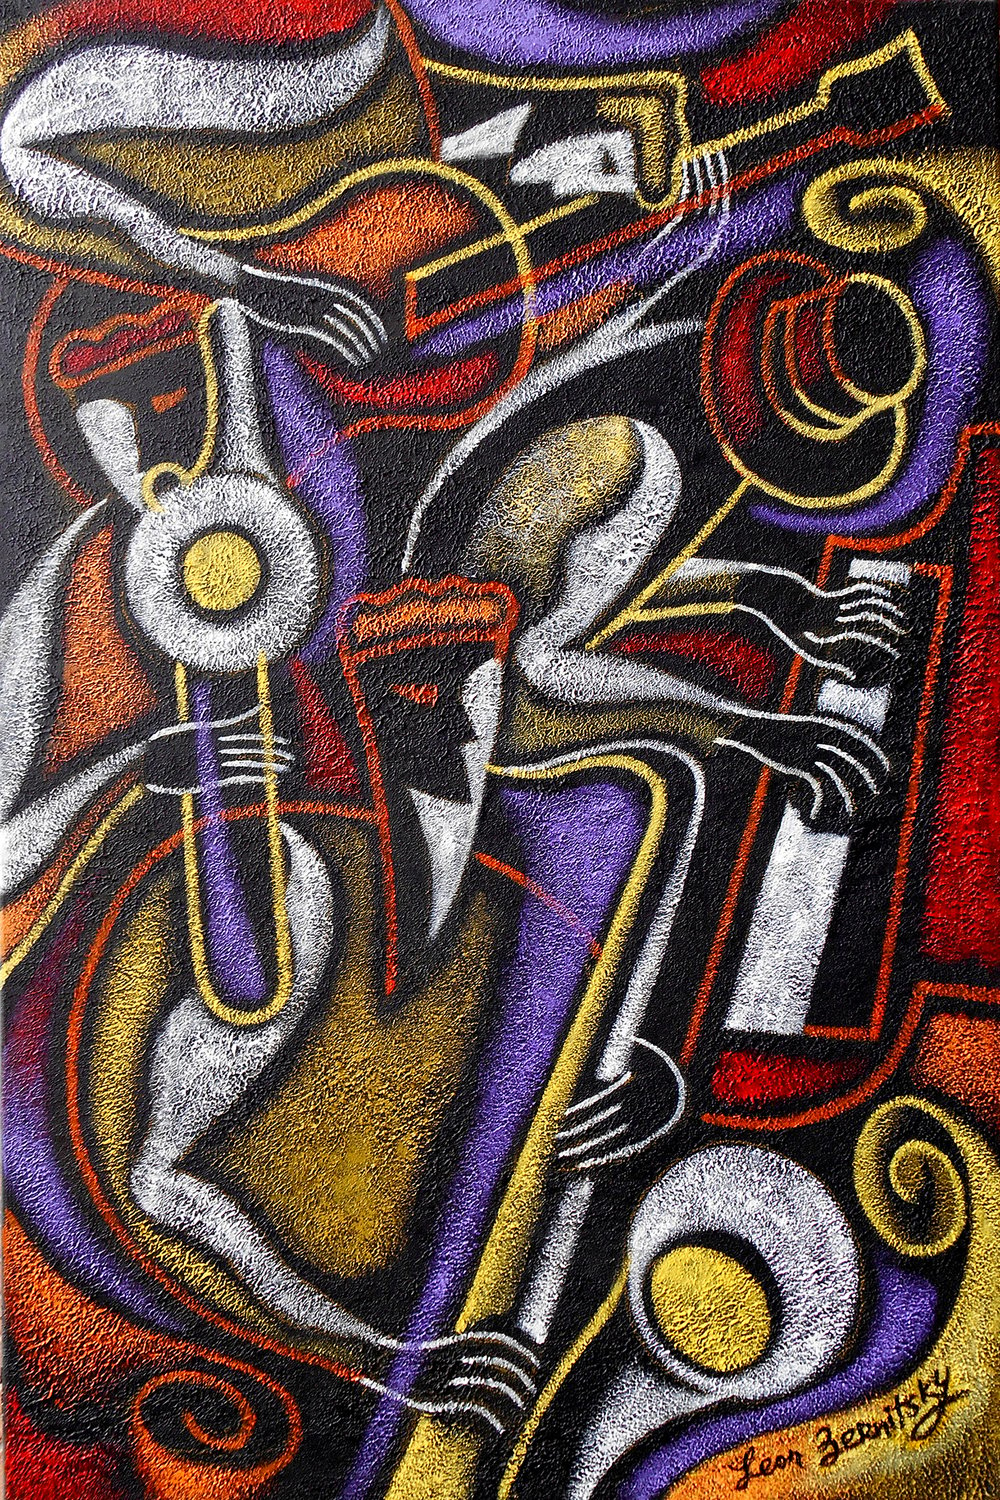 Image of Swing Jazz Decorative Contemporary Original Painting. Free Shipping to US and Canada